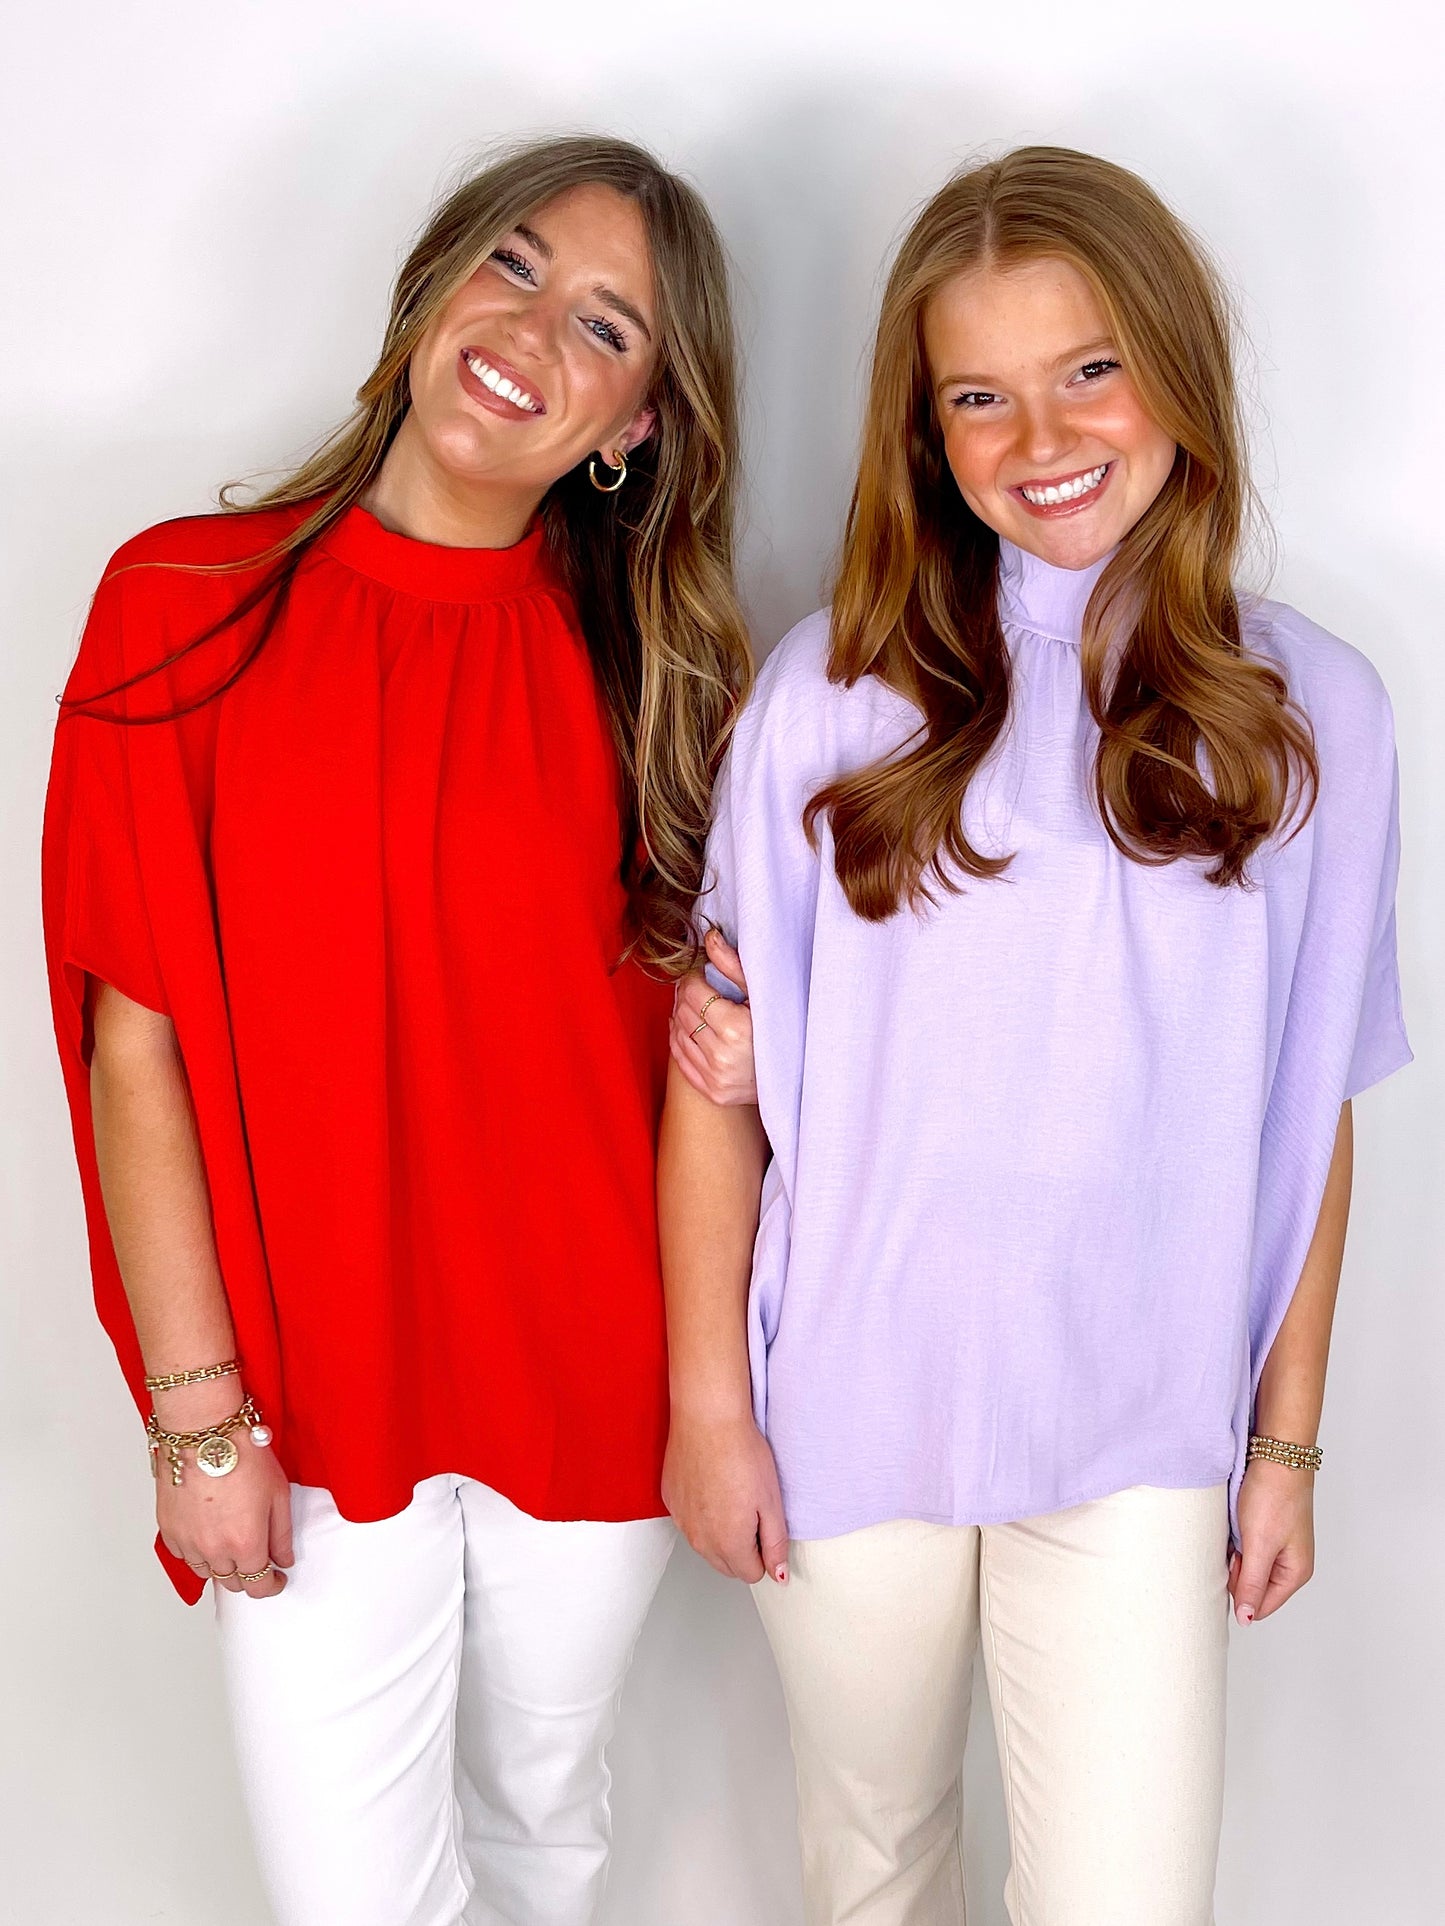 The Blair Top-Short Sleeves-Entro-The Village Shoppe, Women’s Fashion Boutique, Shop Online and In Store - Located in Muscle Shoals, AL.